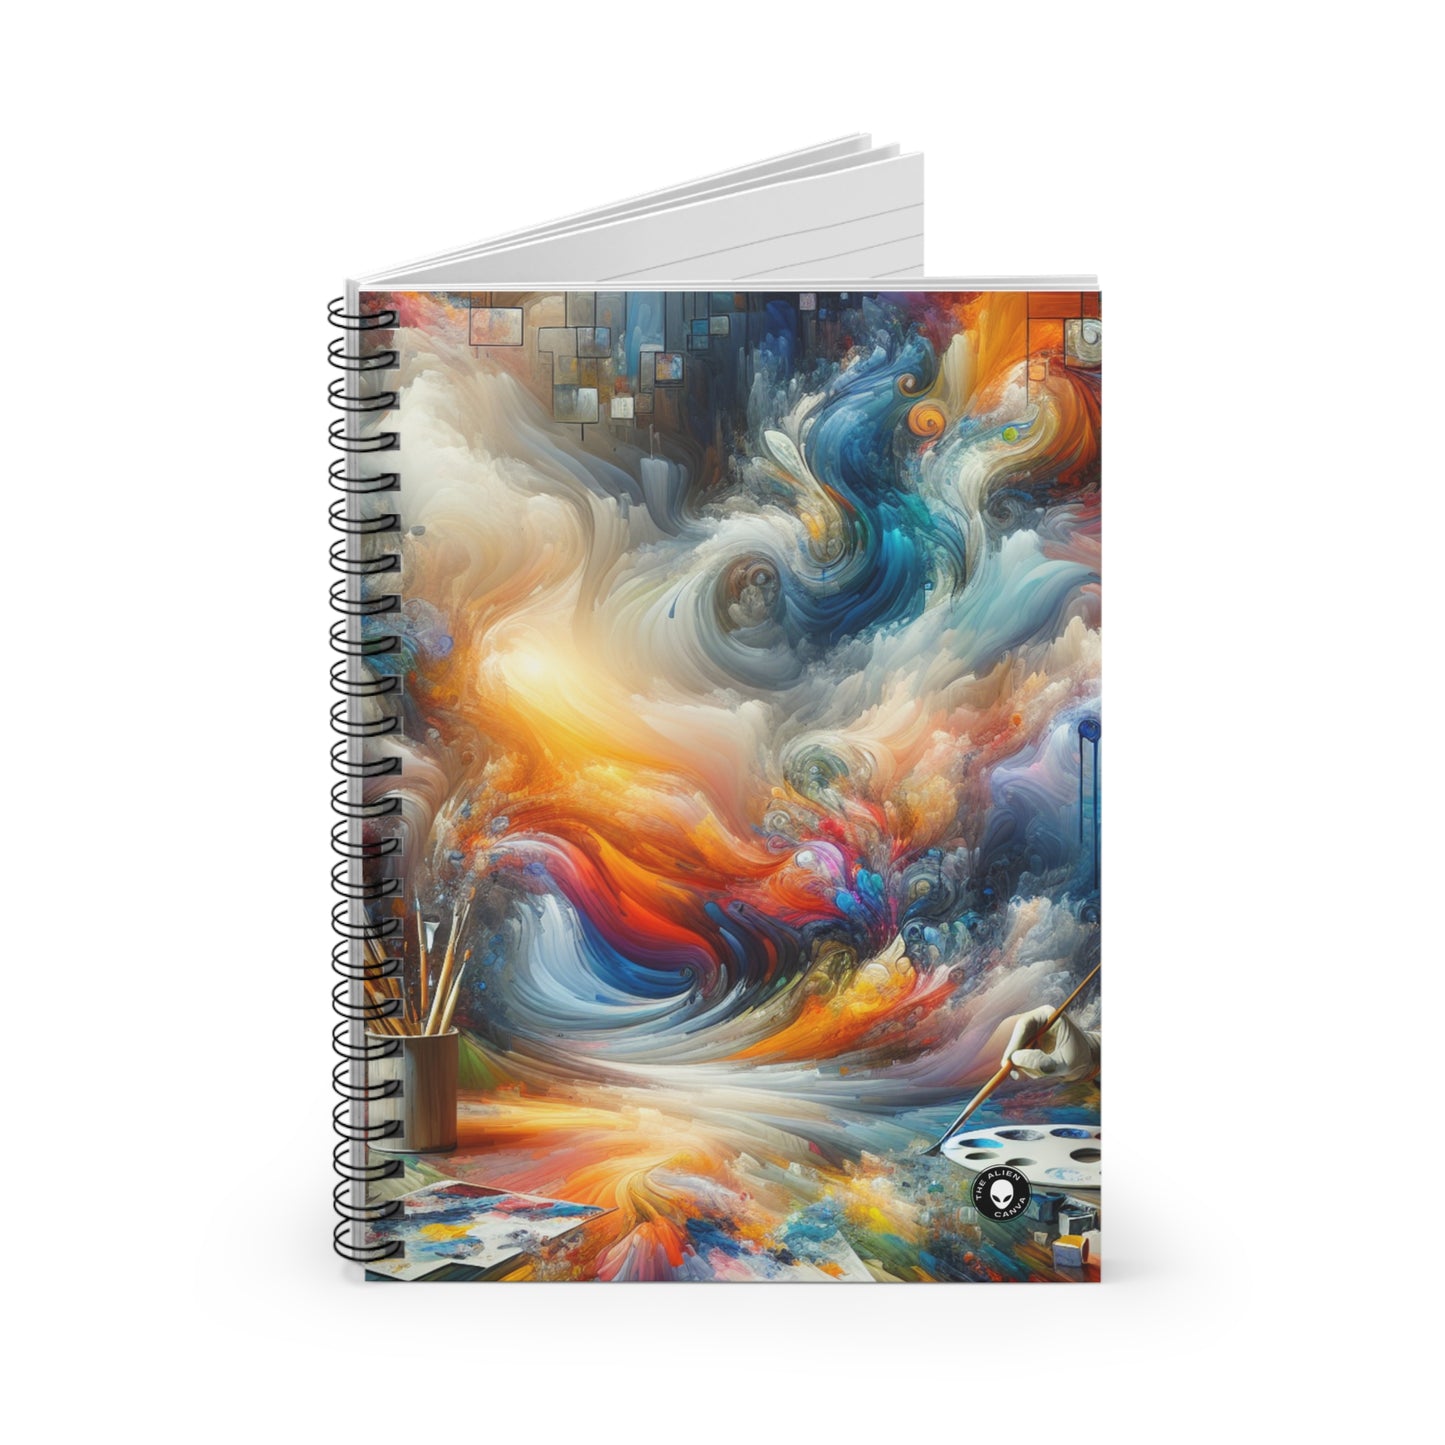 "Mystical Forest: A Whimsical Wonderland" - The Alien Spiral Notebook (Ruled Line) Digital Painting